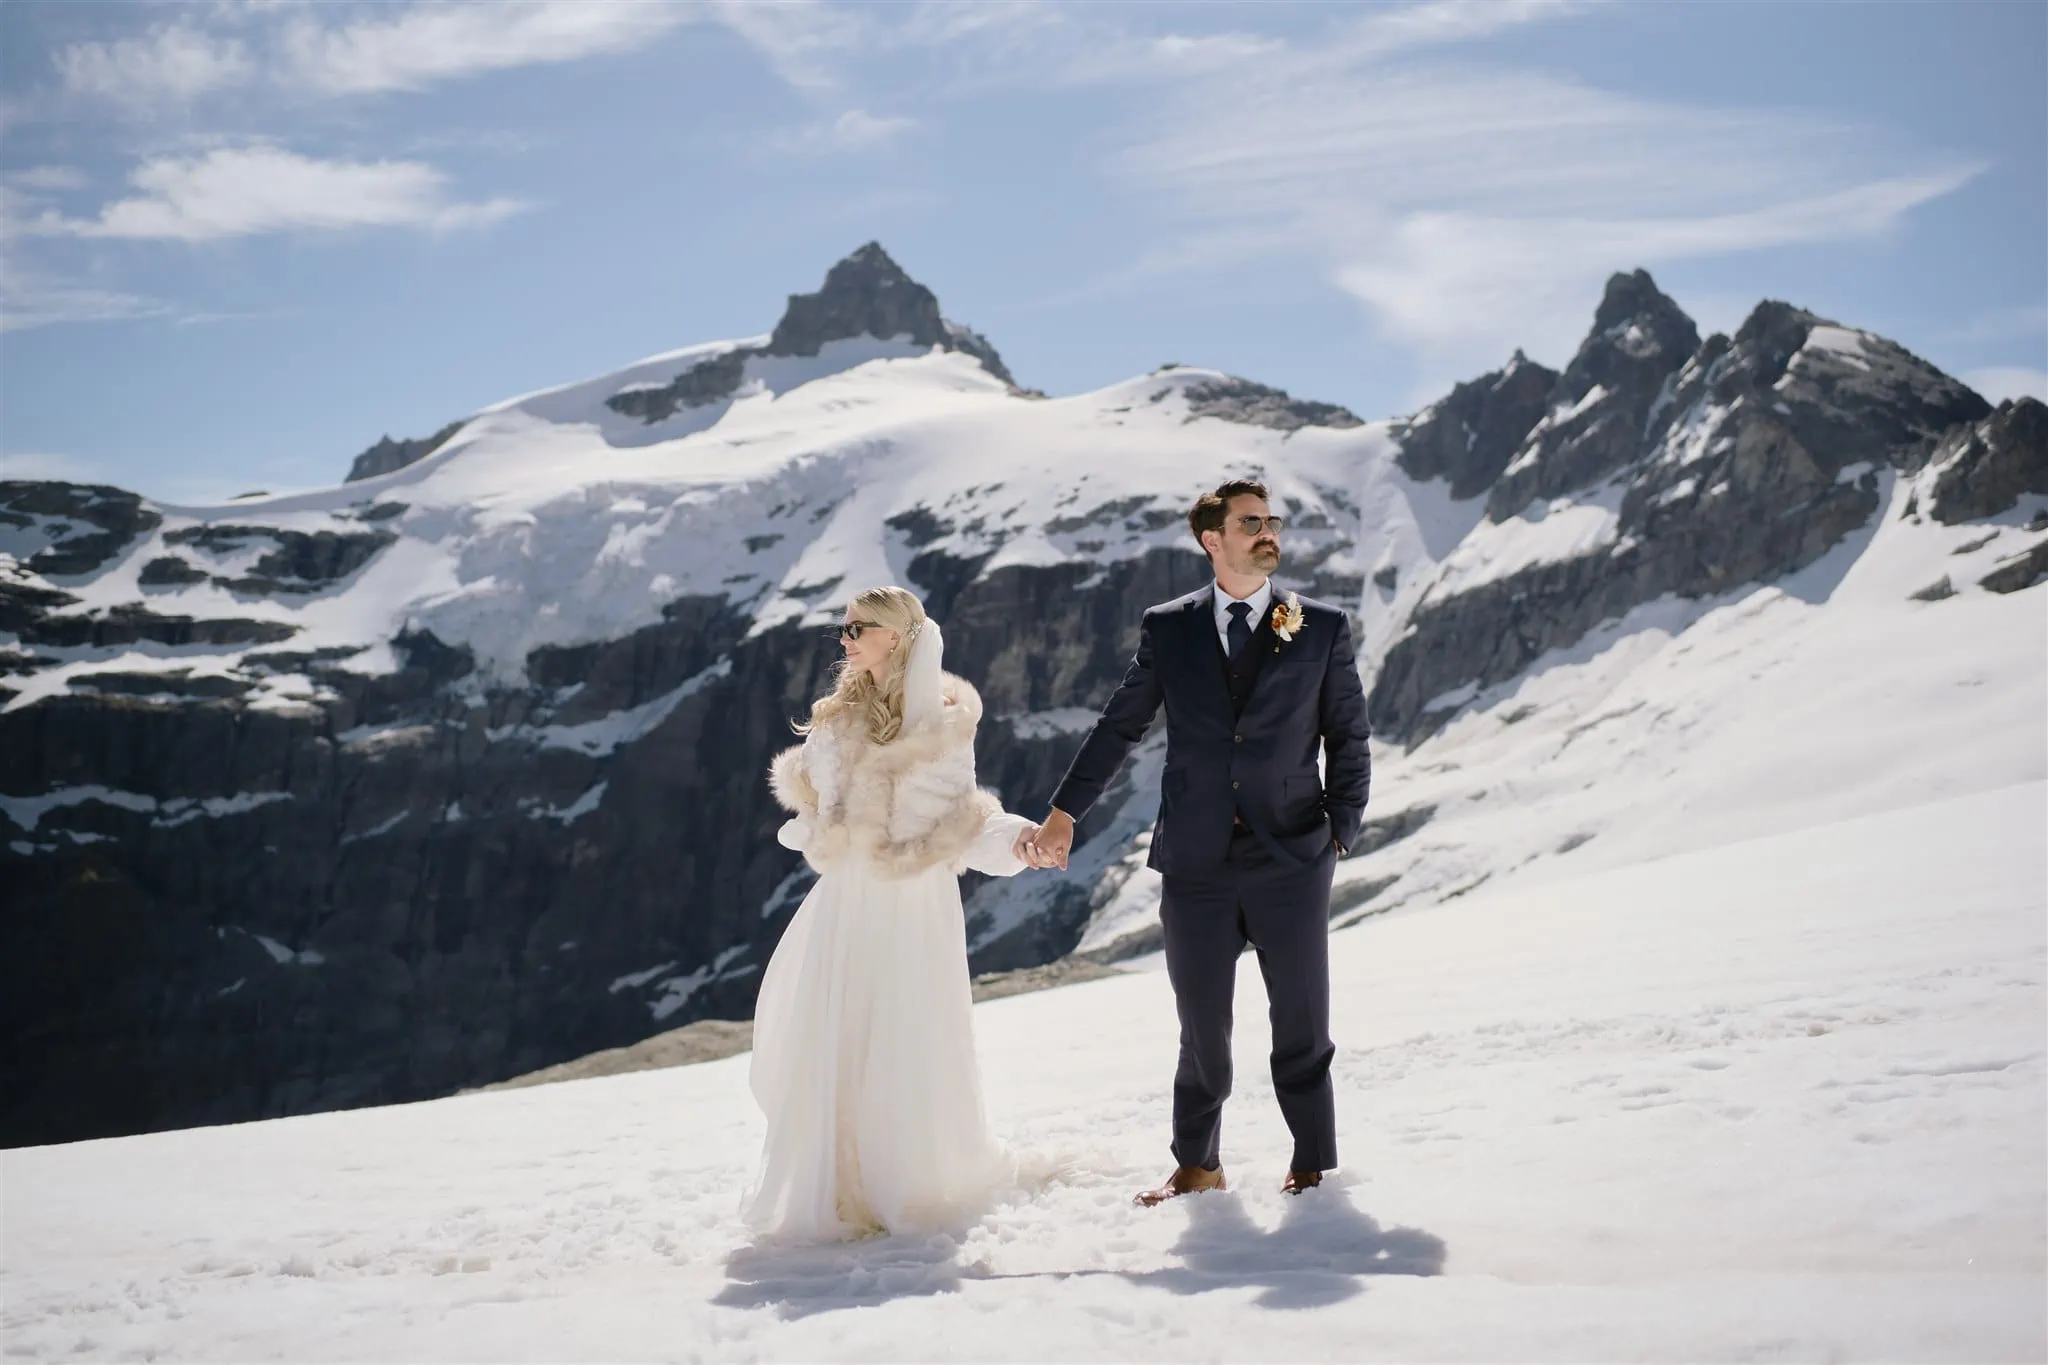 Queenstown New Zealand Heli Wedding Elopement Photographer クイーンズタウン　ニュージーランド　エロープメント 結婚式 | A bride and groom holding hands on a snow-covered mountain landscape during their elopement wedding.